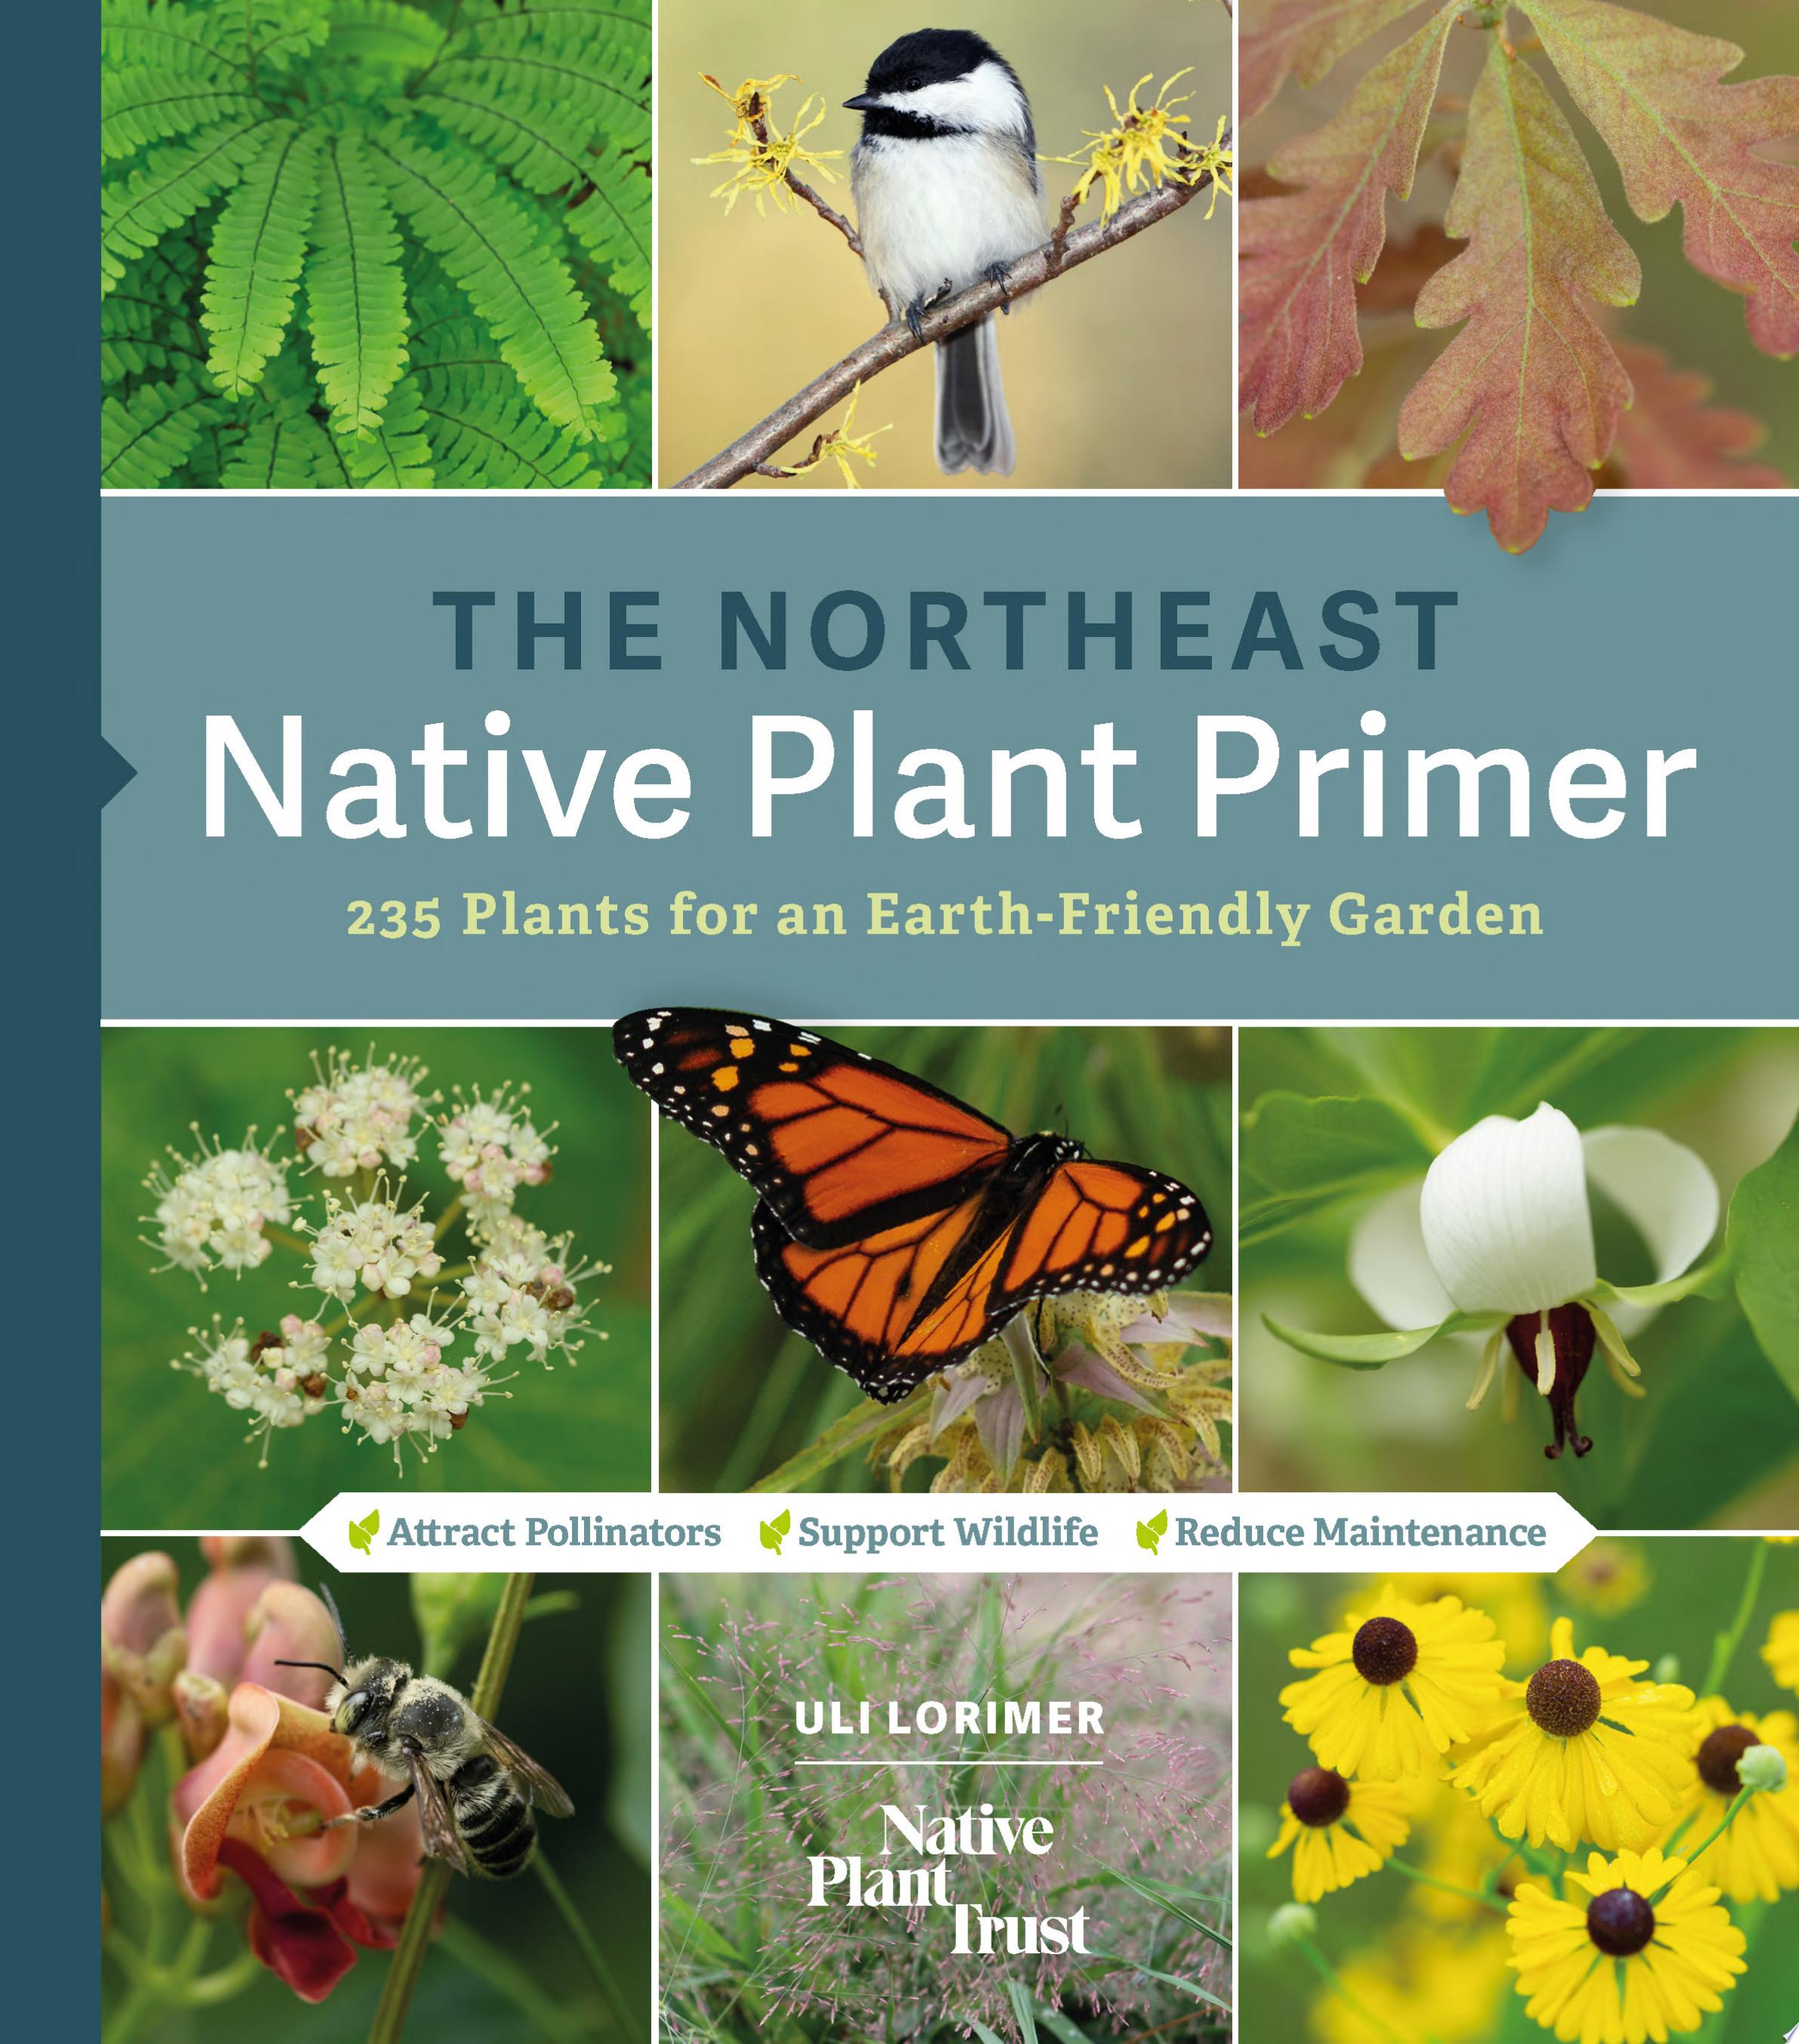 Image for "The Northeast Native Plant Primer"